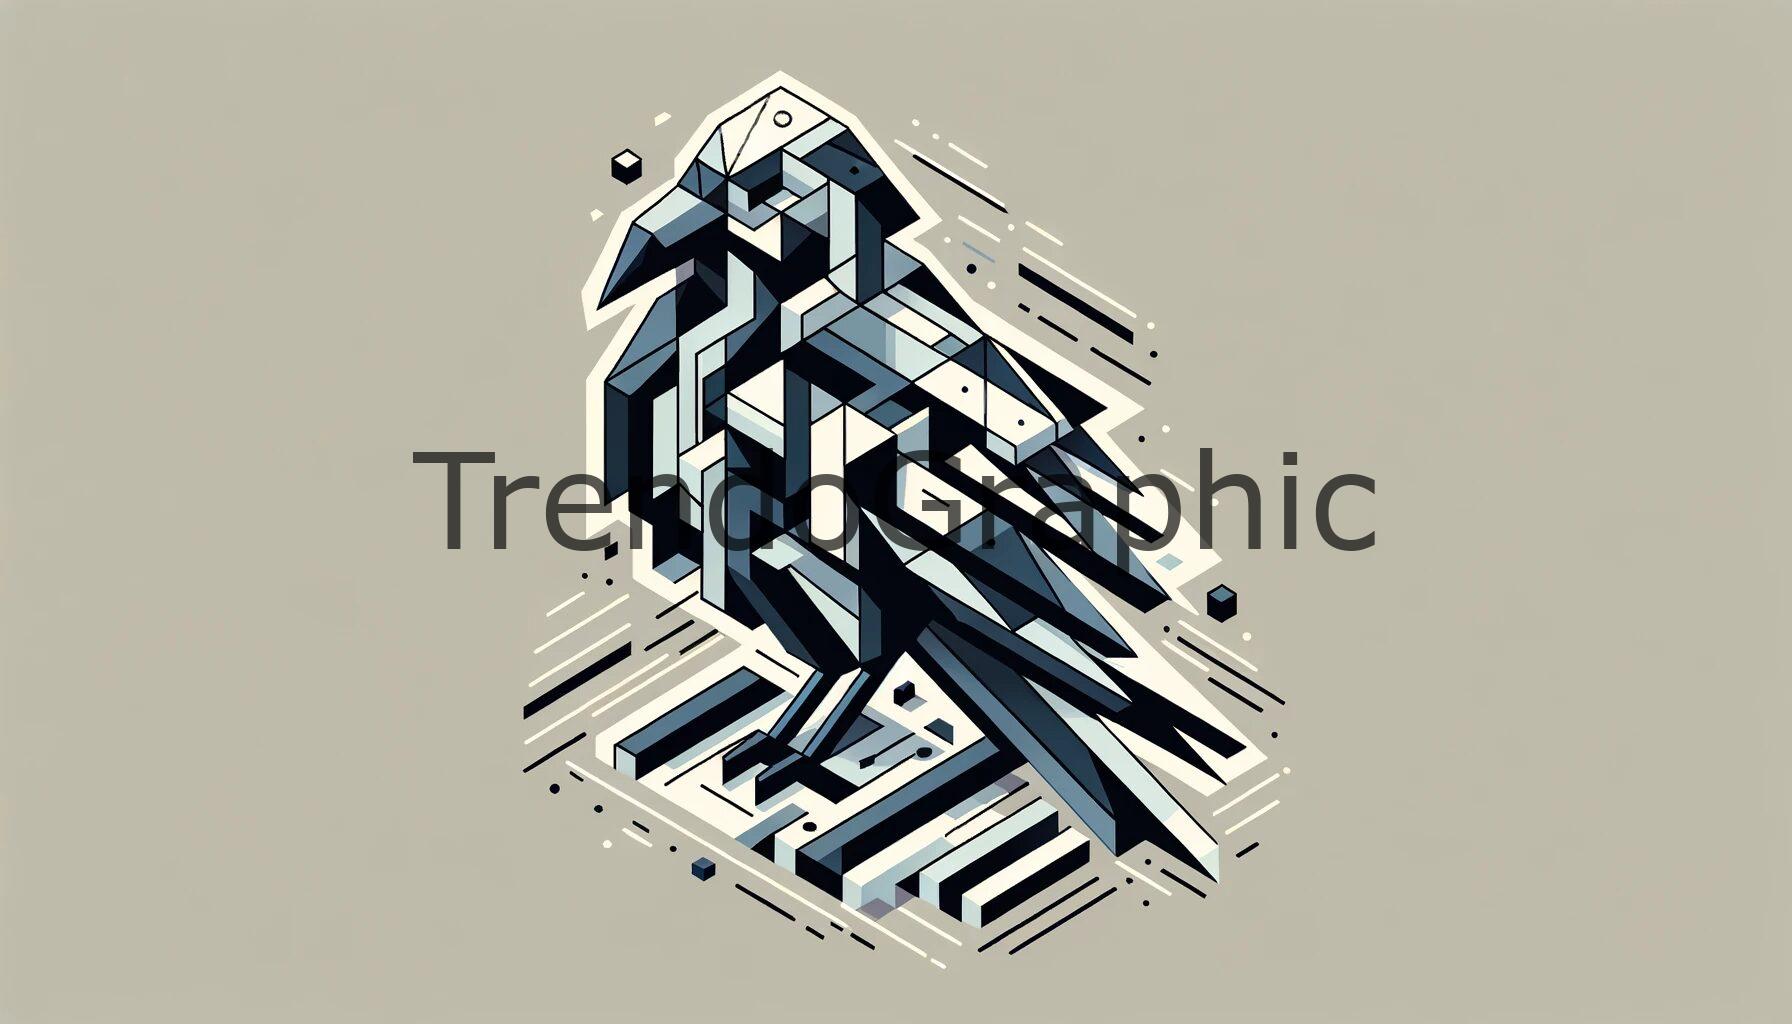 Geometric Avian Art: Abstract Crow in Isometric Style